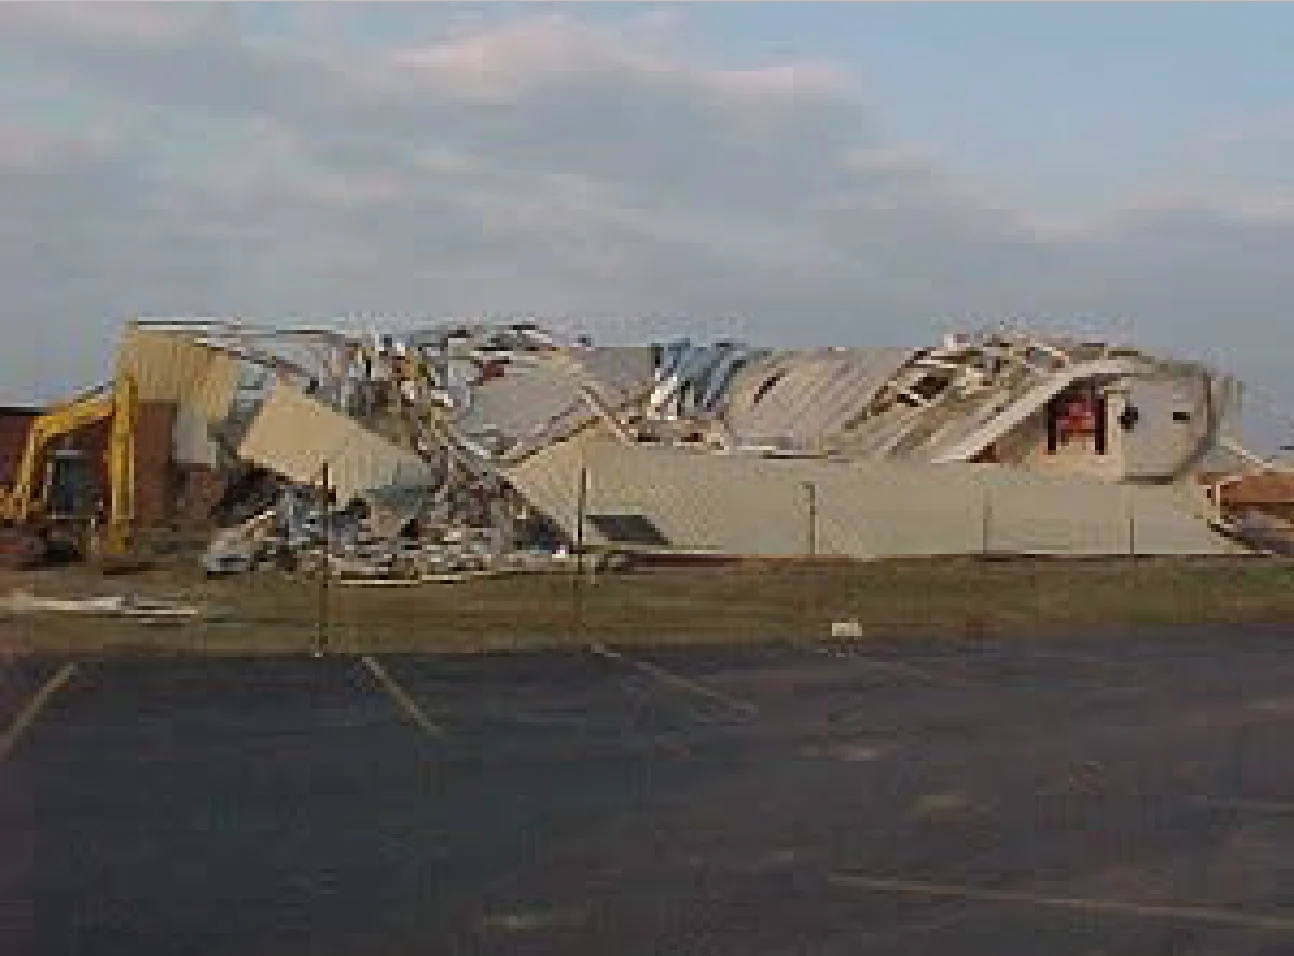 NOAA: A high school gym was destroyed by a tornado at Beebe (White County) on 01/21/1999.